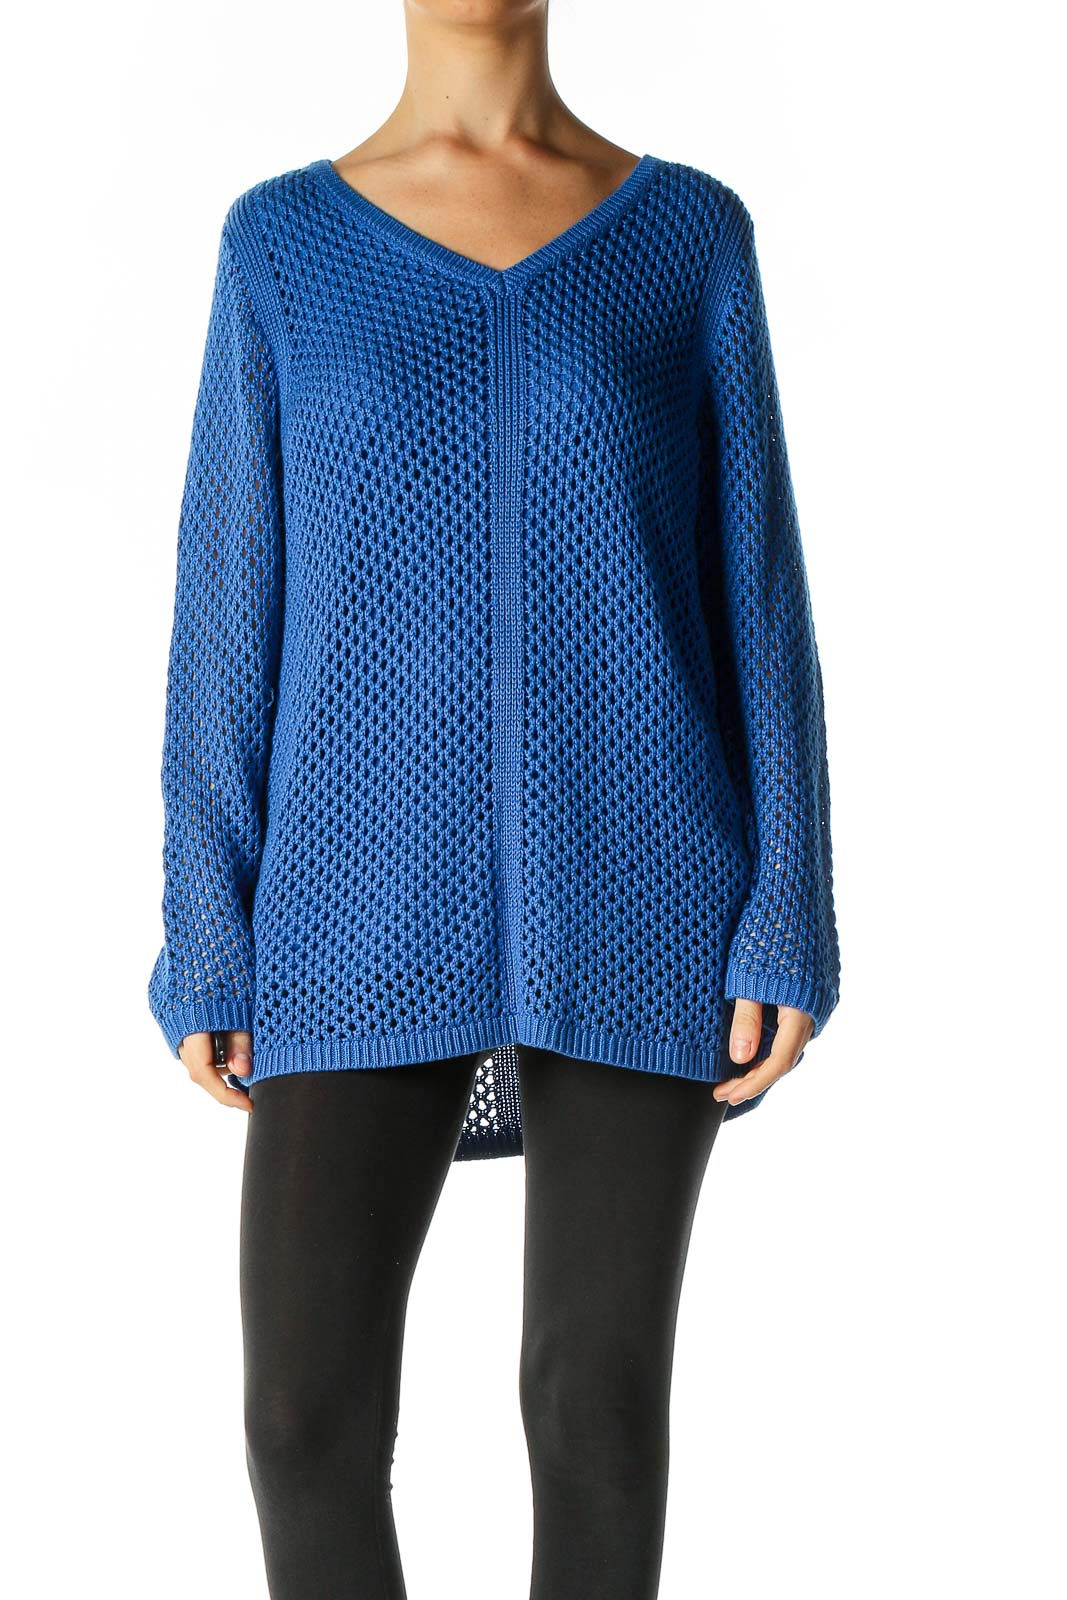 Blue Textured Casual Blouse Front